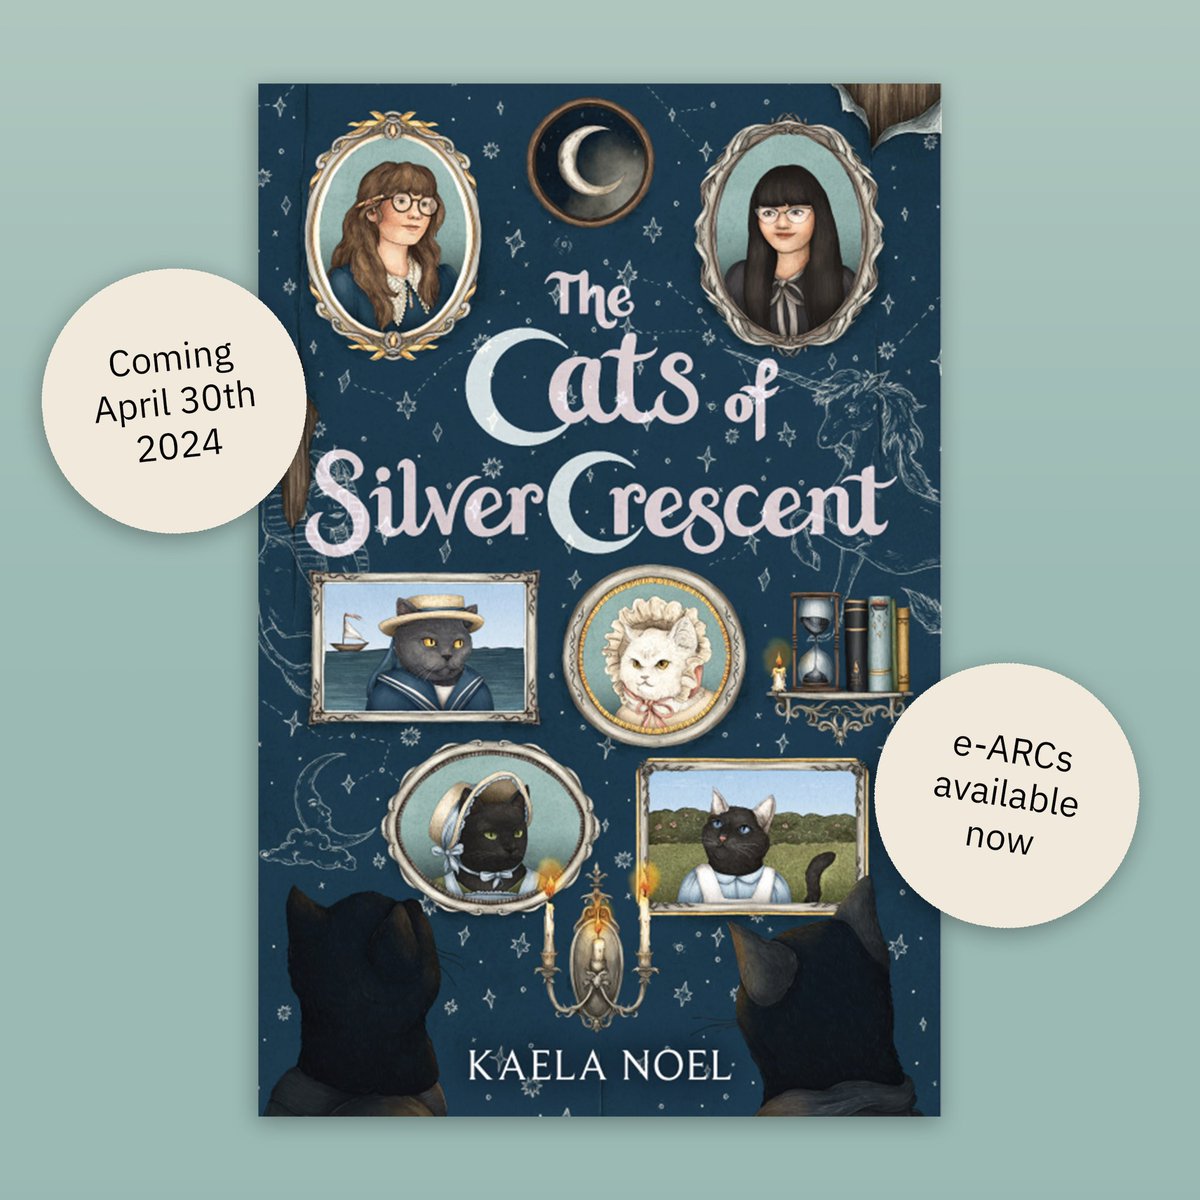 THE CATS OF SILVER CRESCENT pubs on 4/30/24! A spooky #mglit novel about a girl who discovers a family of magical talking cats who need her help to survive—but every enchantment comes at a price. Pre-order: harpercollins.com/products/the-c… E-ARCs available! @NetGalley @edelweiss_squad